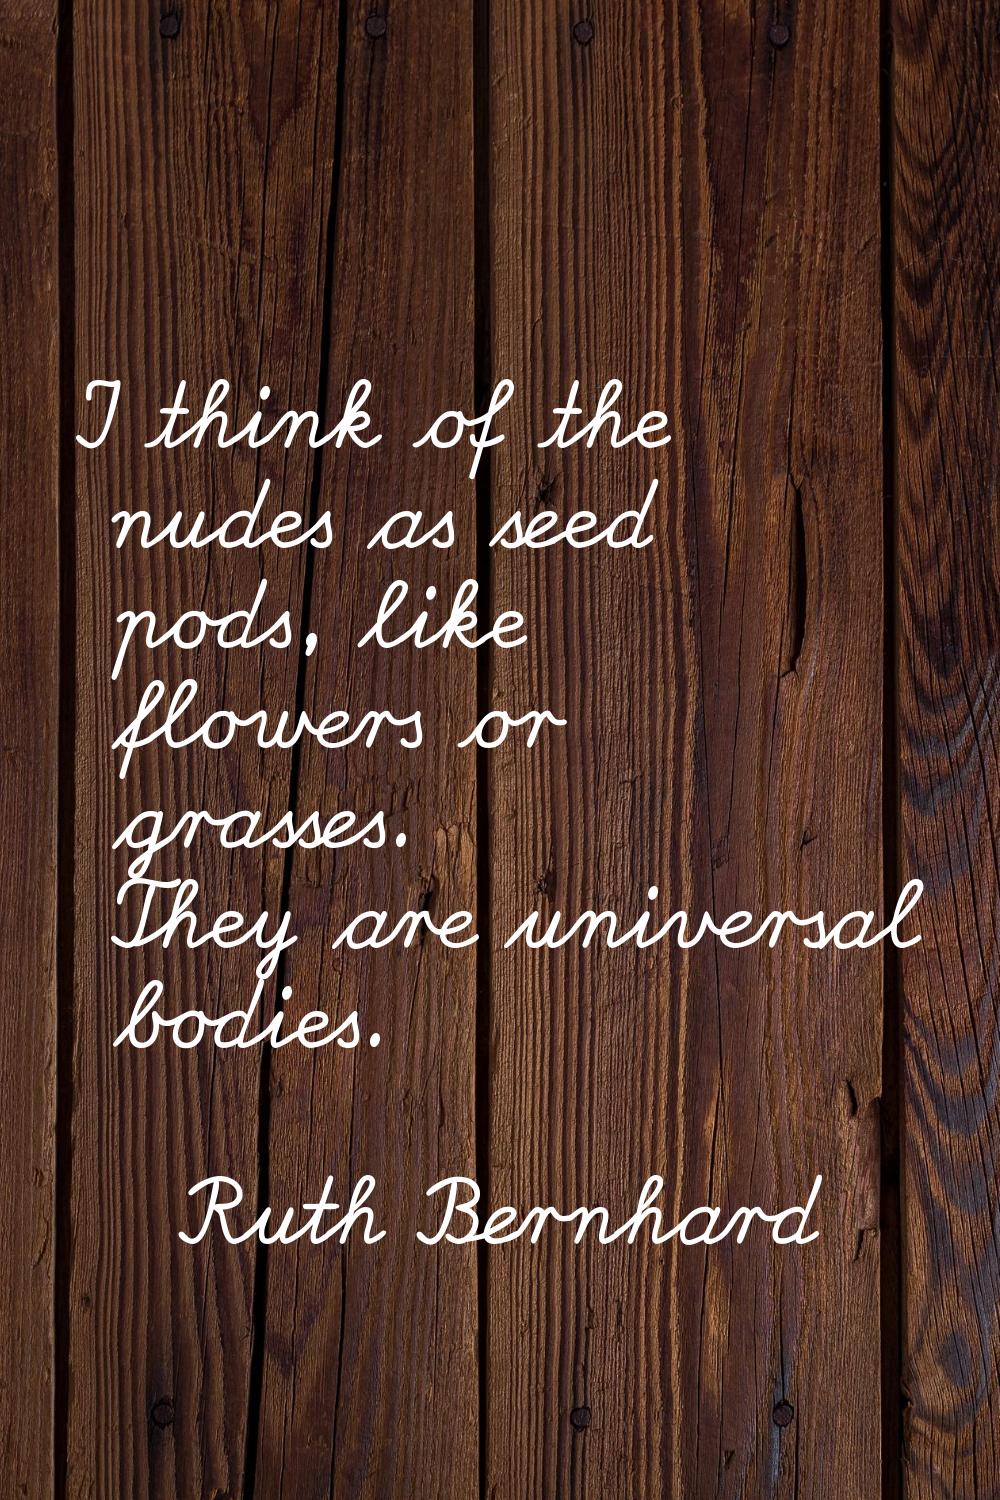 I think of the nudes as seed pods, like flowers or grasses. They are universal bodies.